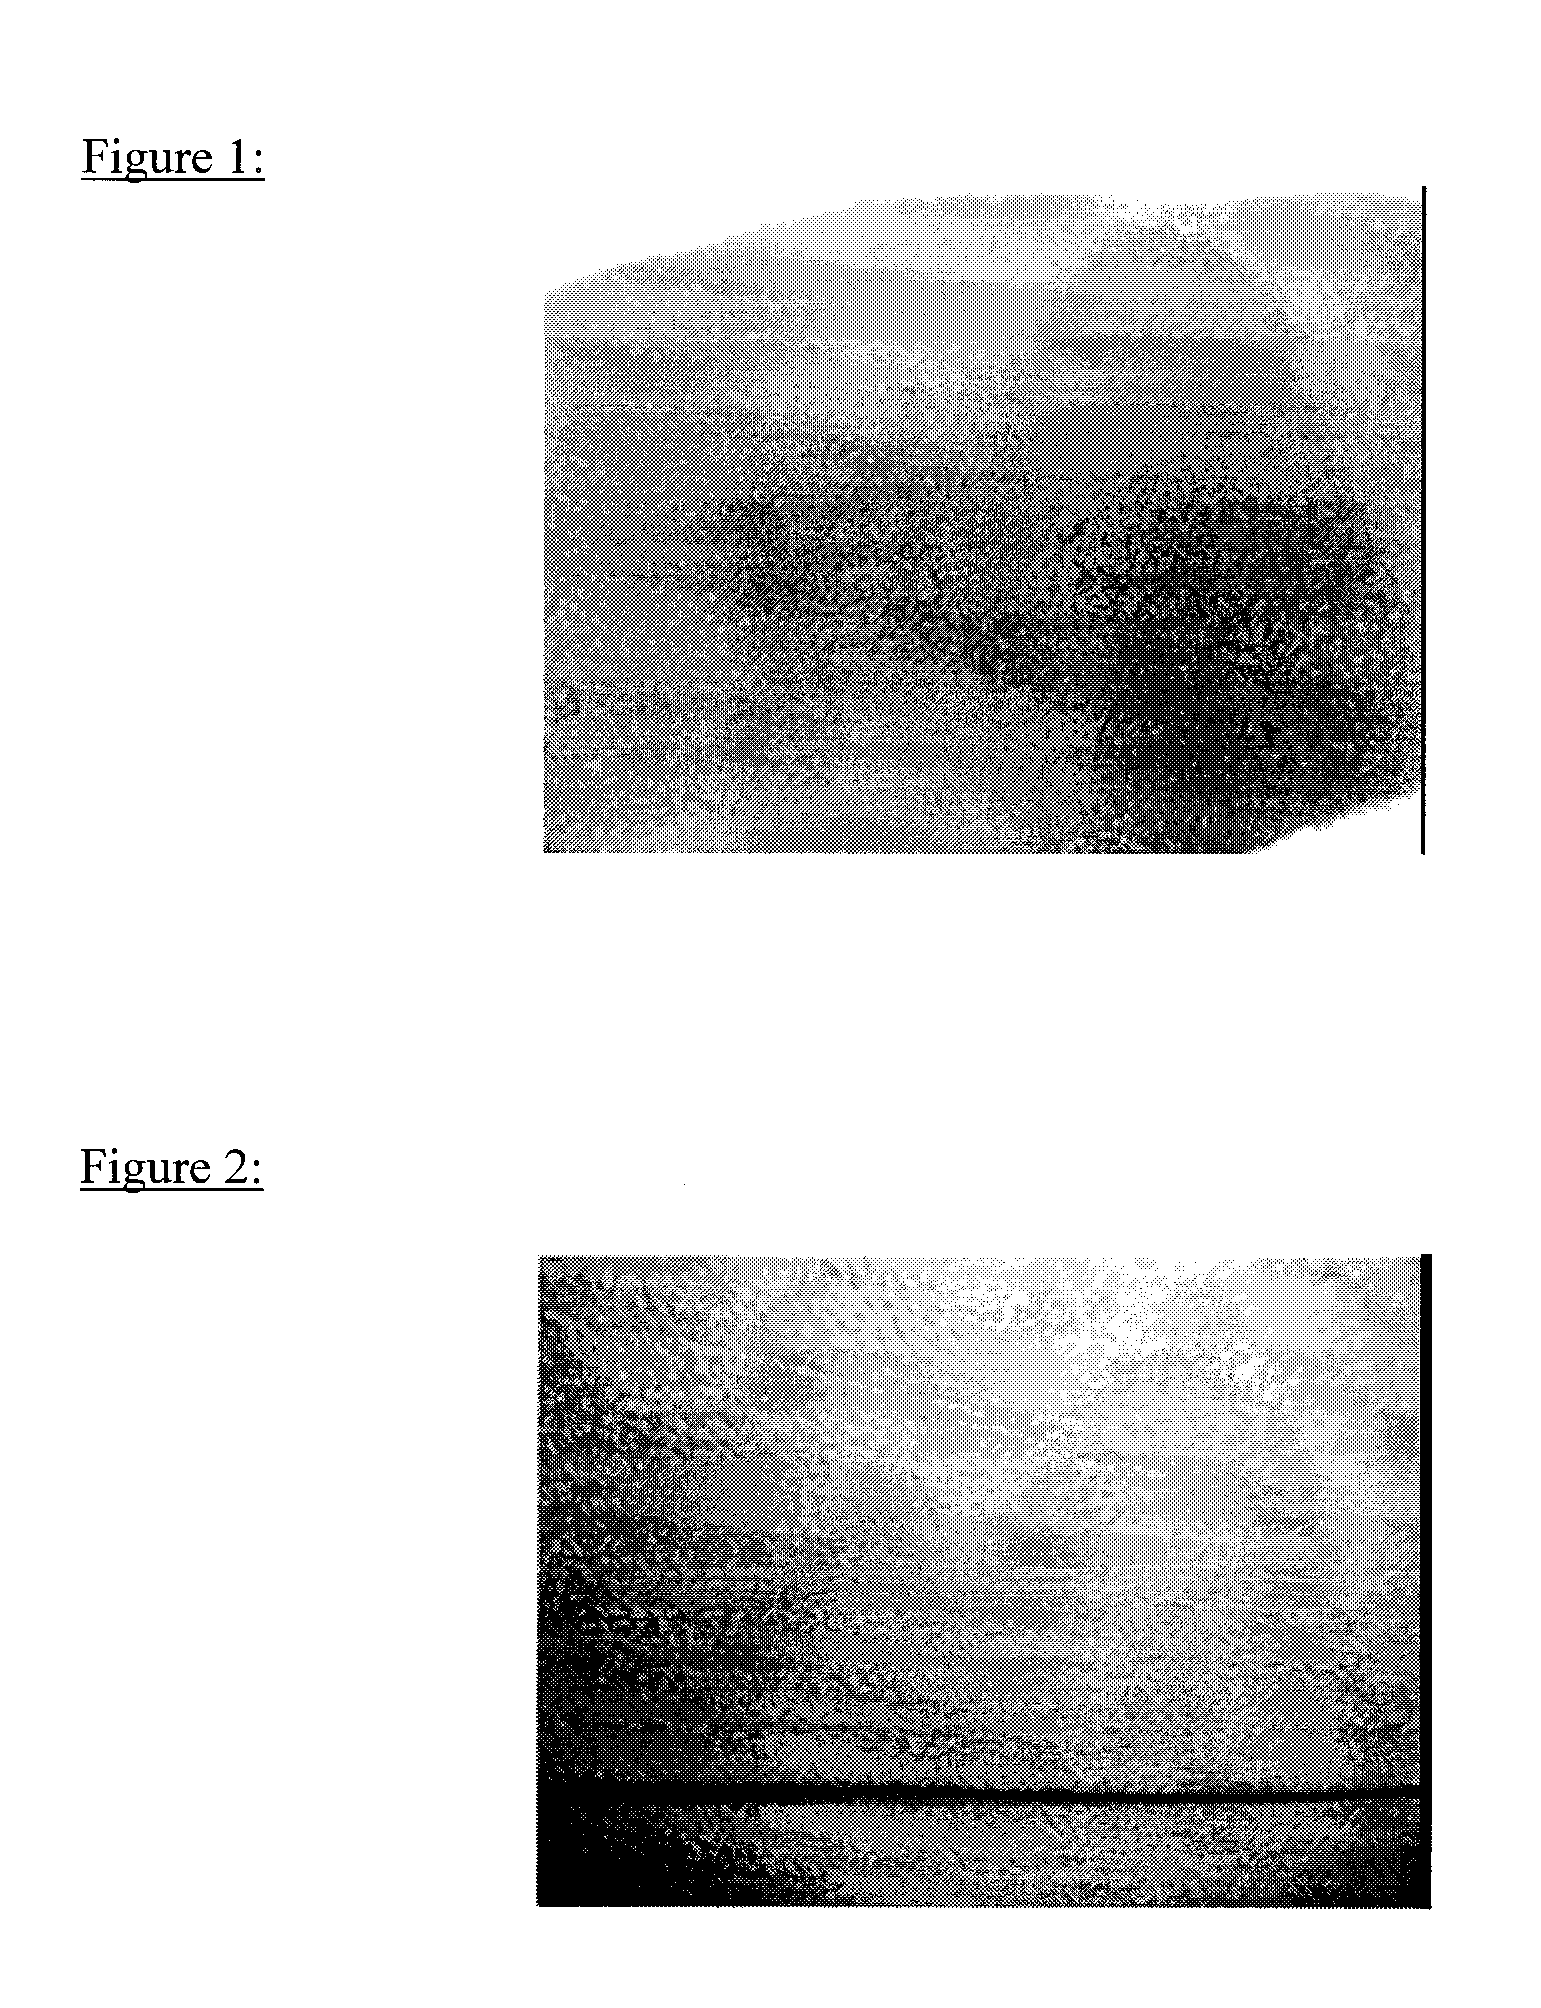 Thermoplastic resin-based composition for making single-layer skins or composites with speckled appearance for parts of motor vehicle passenger compartment and method for obtaining same